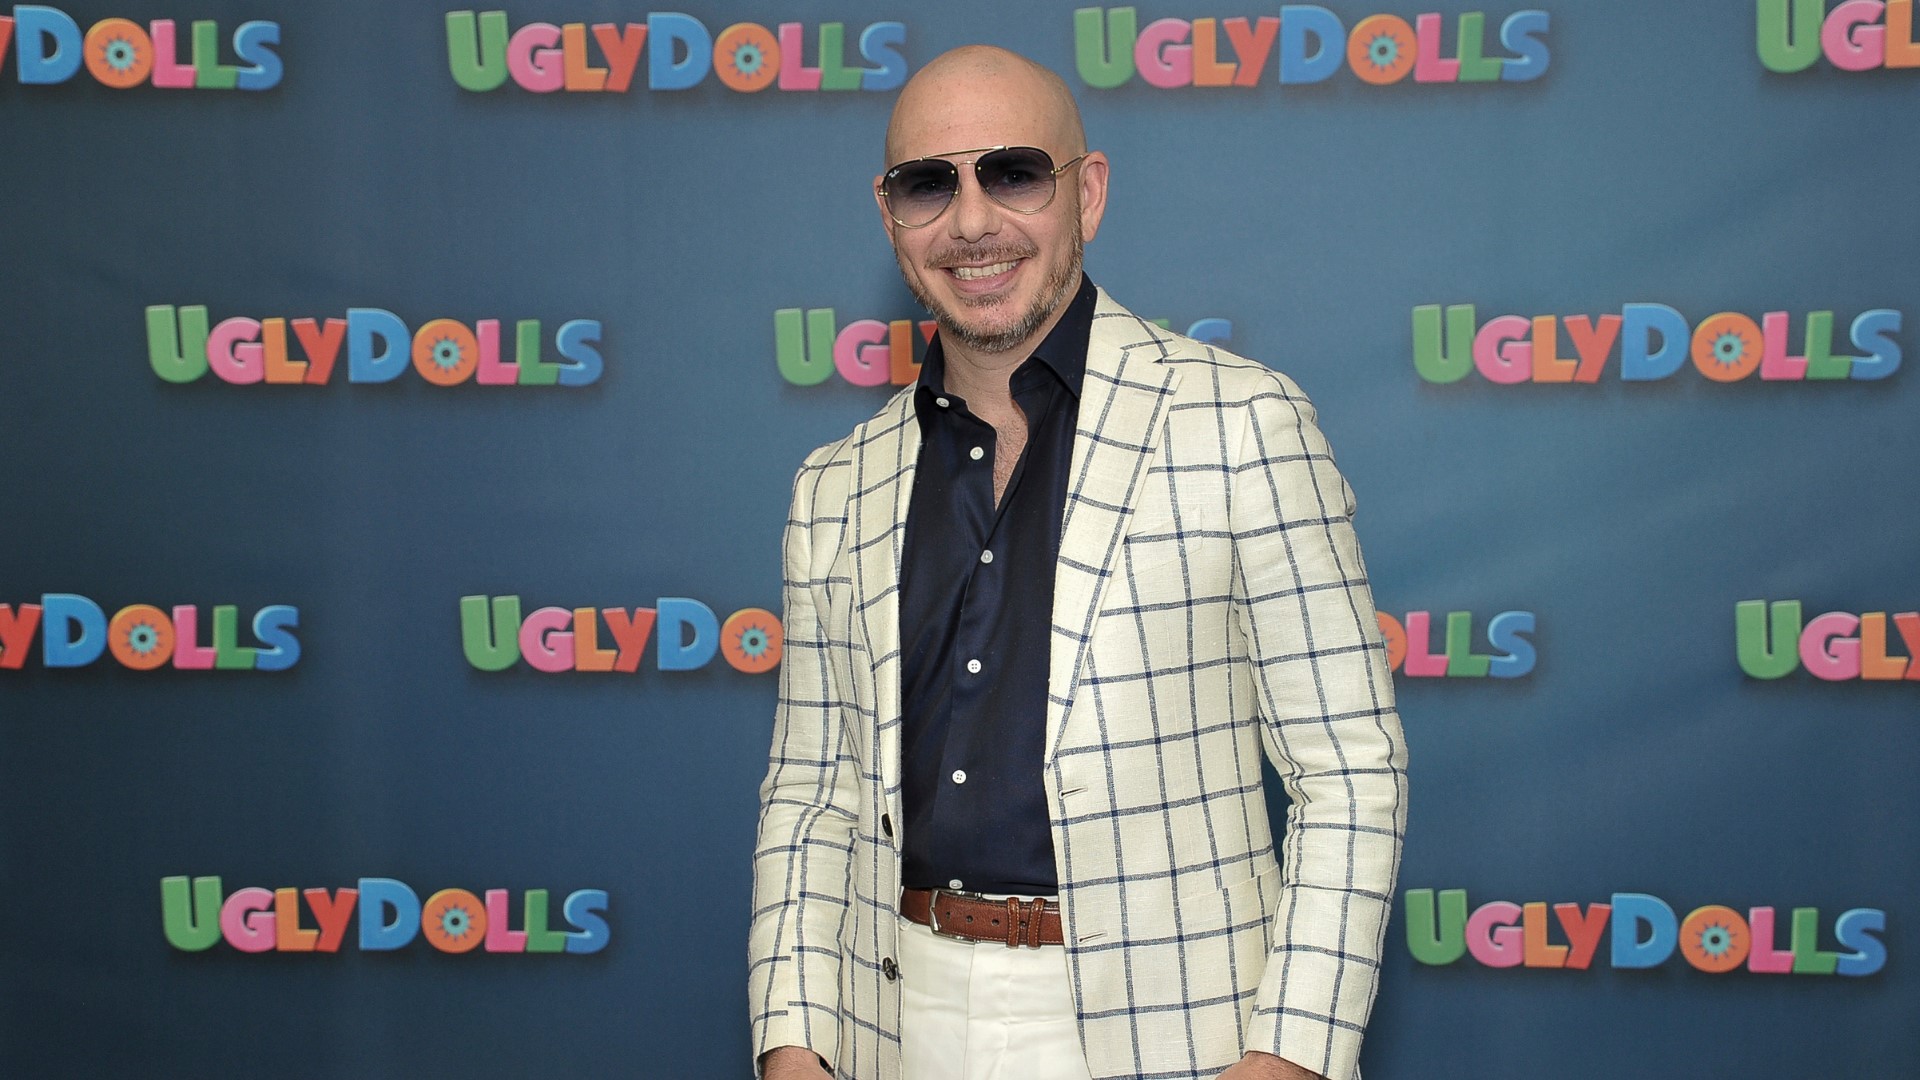 "Due to unforeseen circumstances," Mr. Worldwide will not be playing in the Denver area until September.